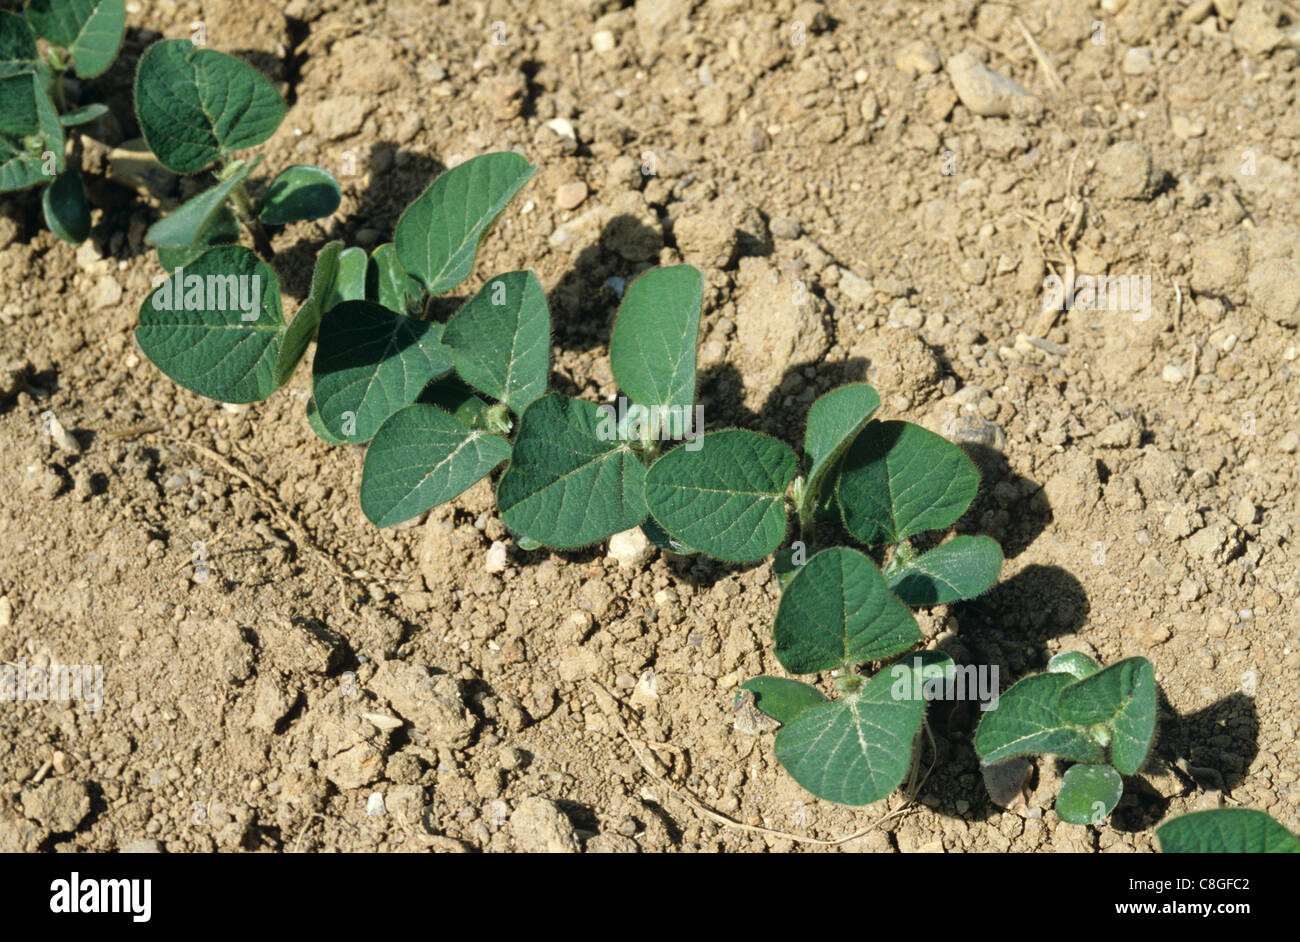 Young soybean plants, Italy Stock Photo